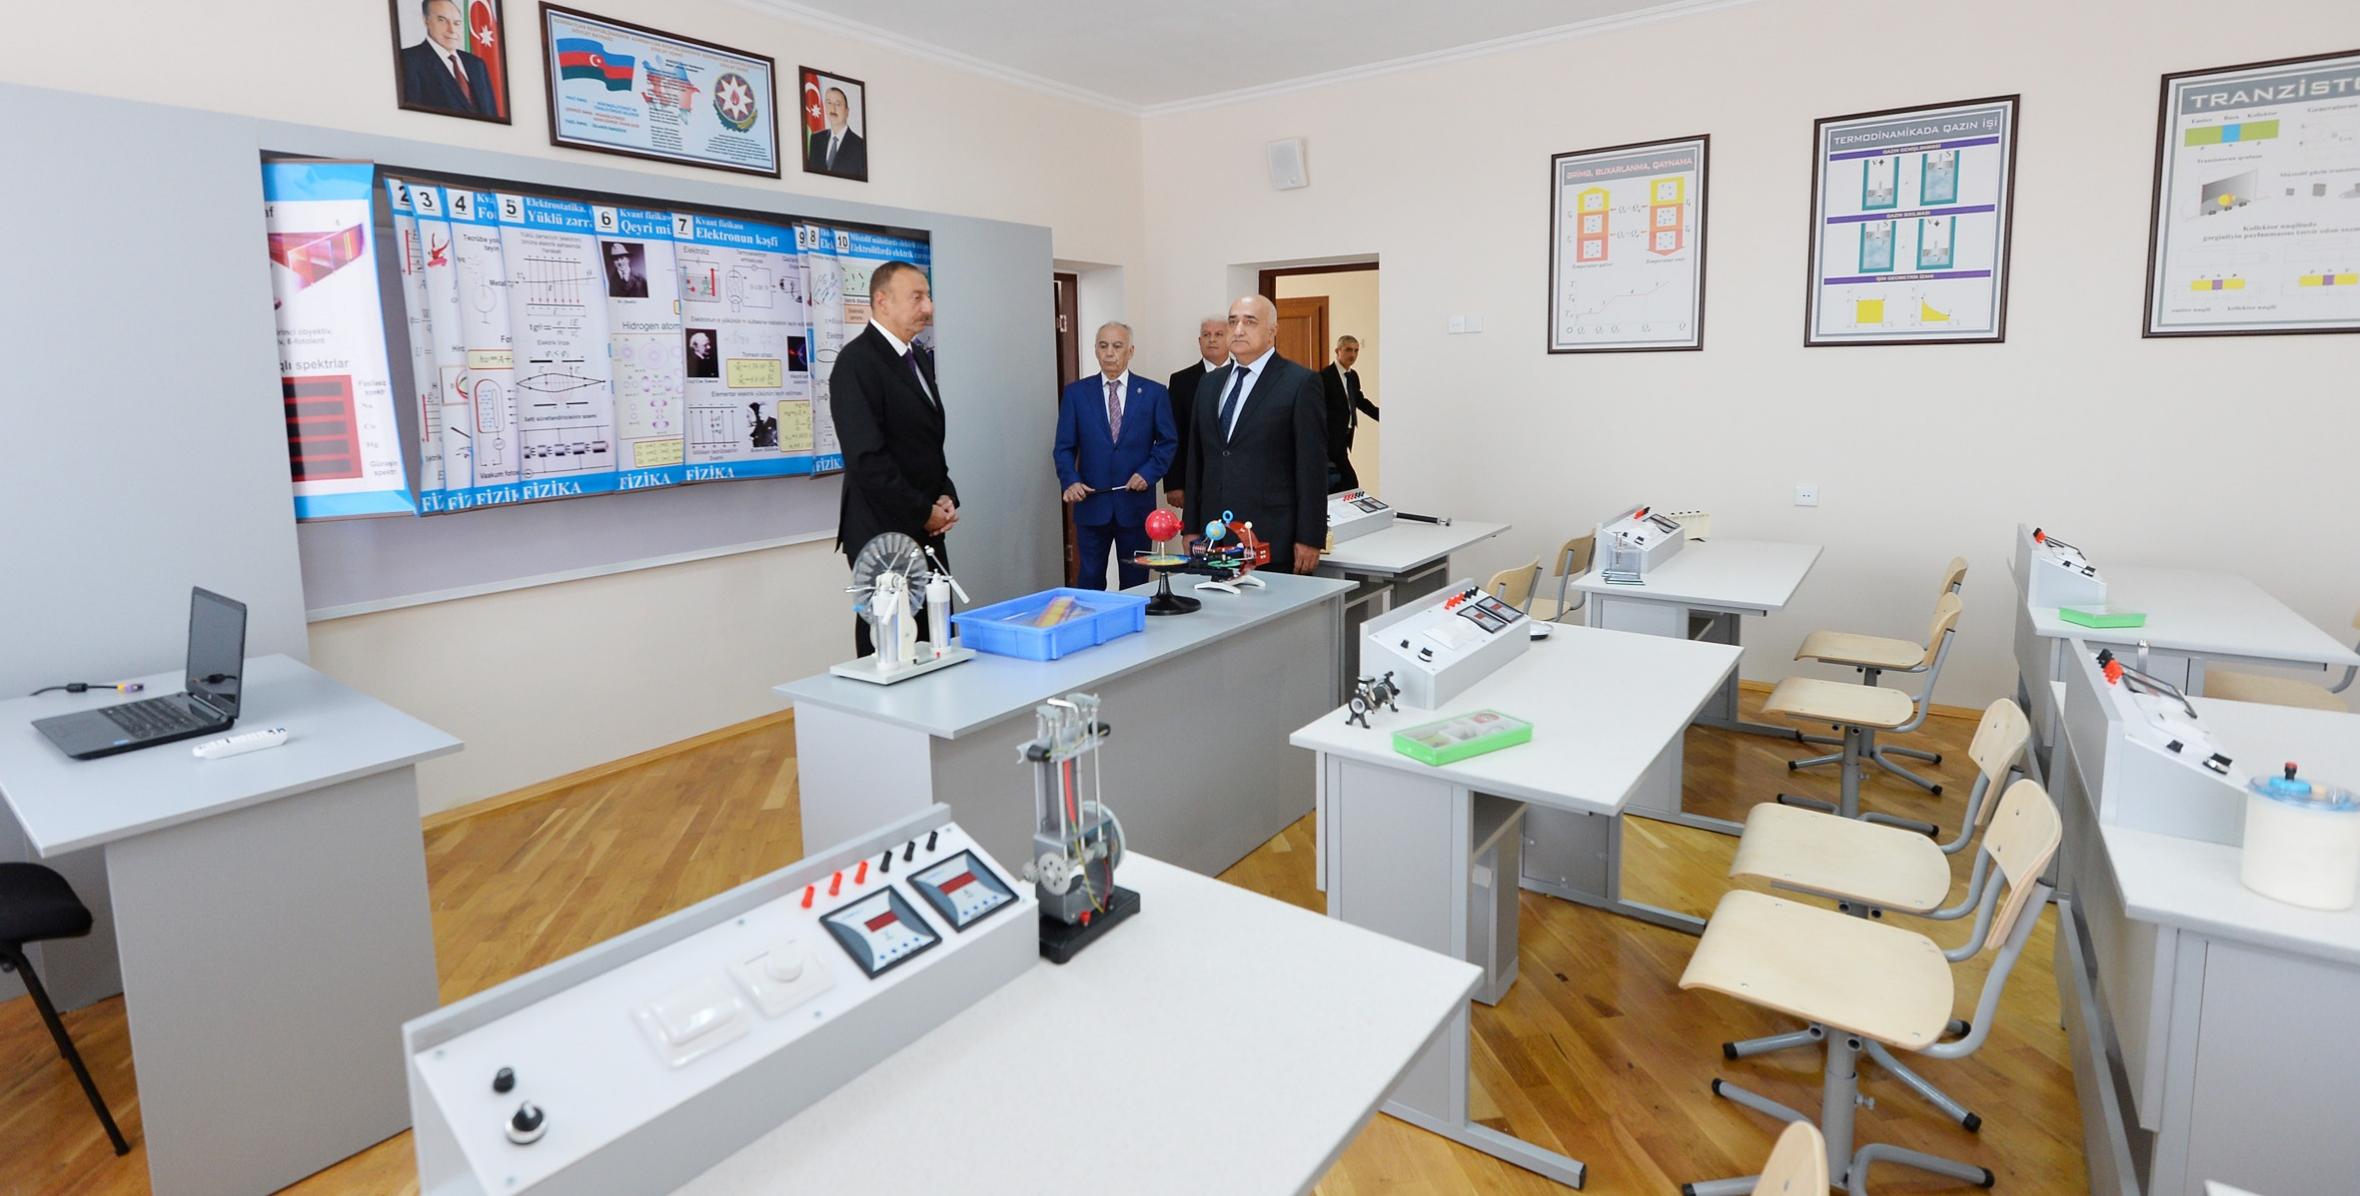 Ilham Aliyev viewed additional classrooms built in school No. 58 in Khatai